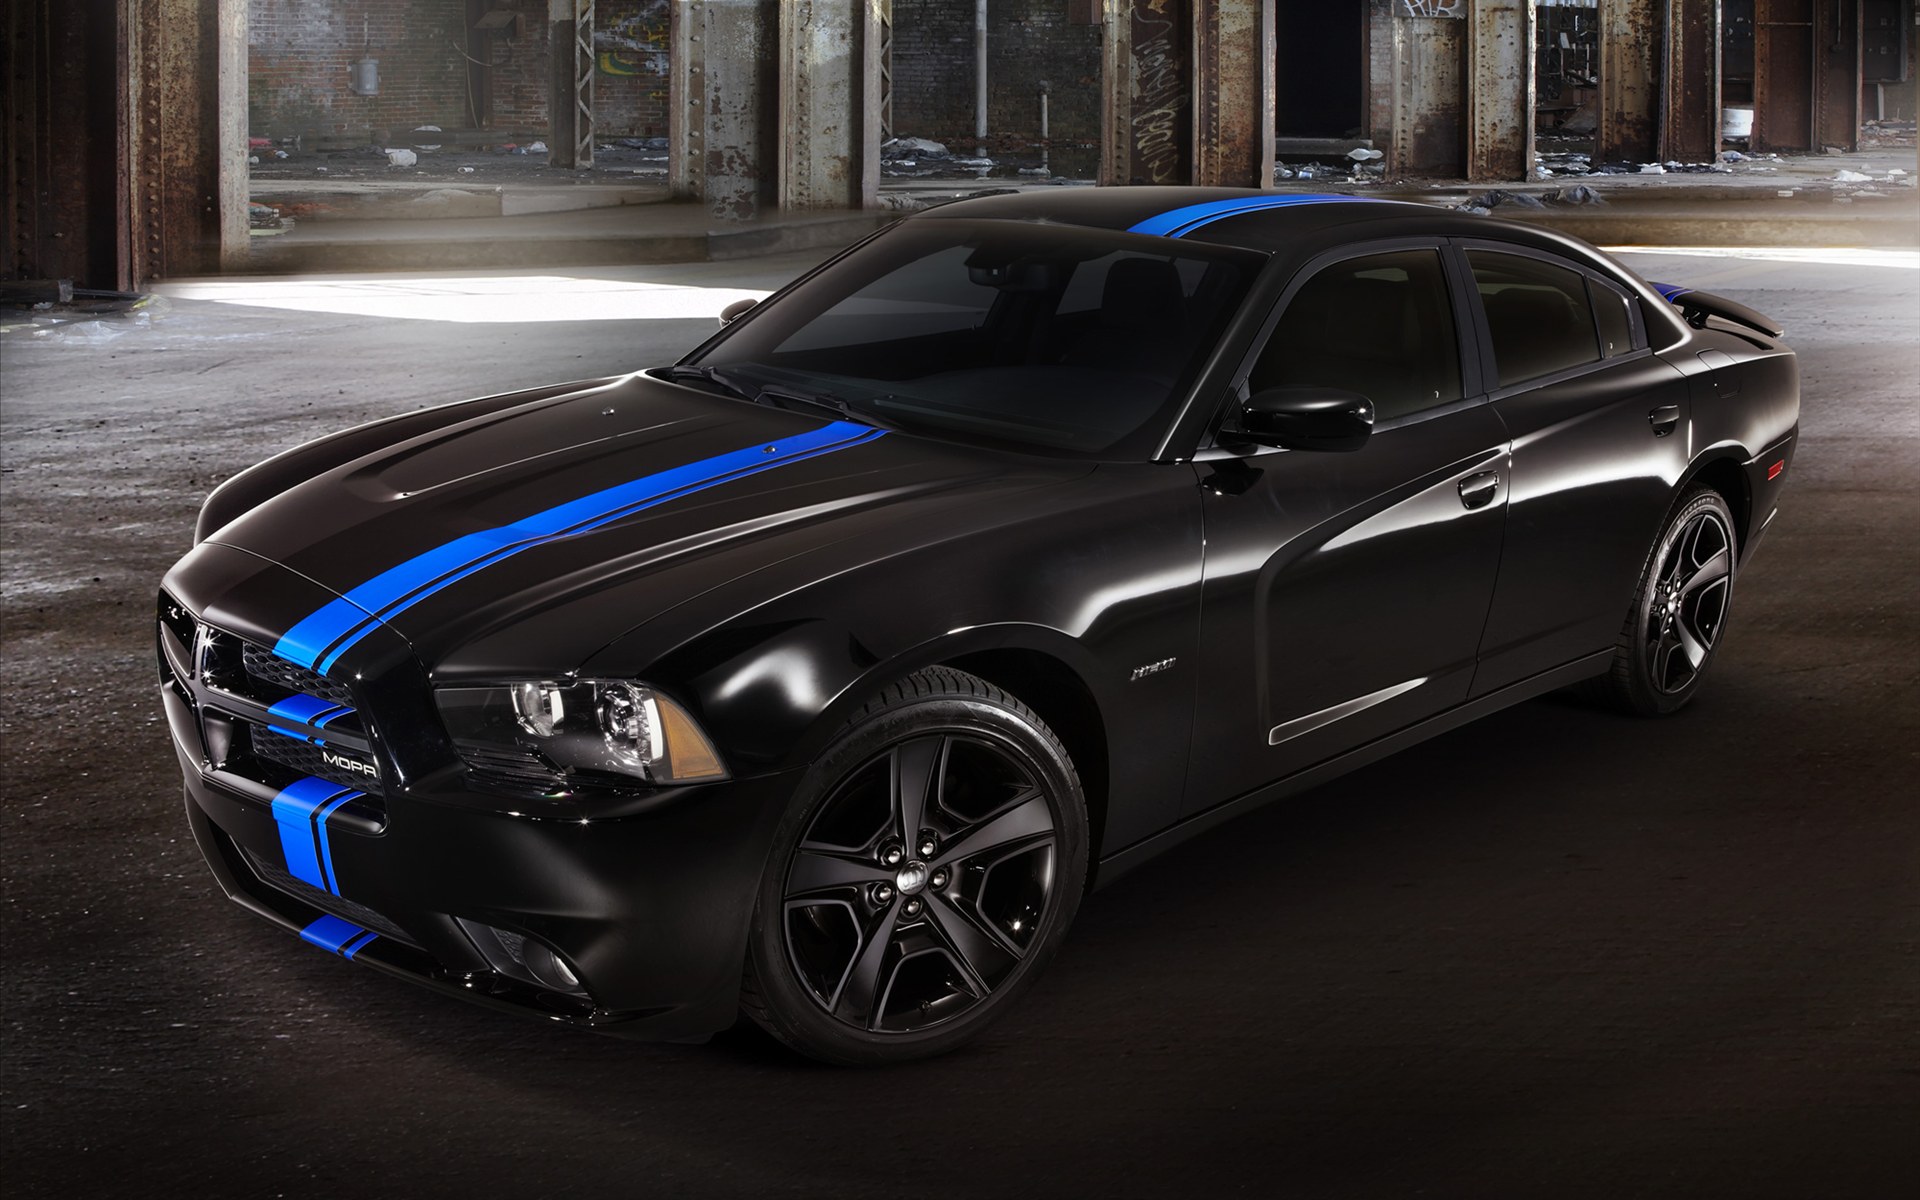 Cool Dodge Charger Wallpapers